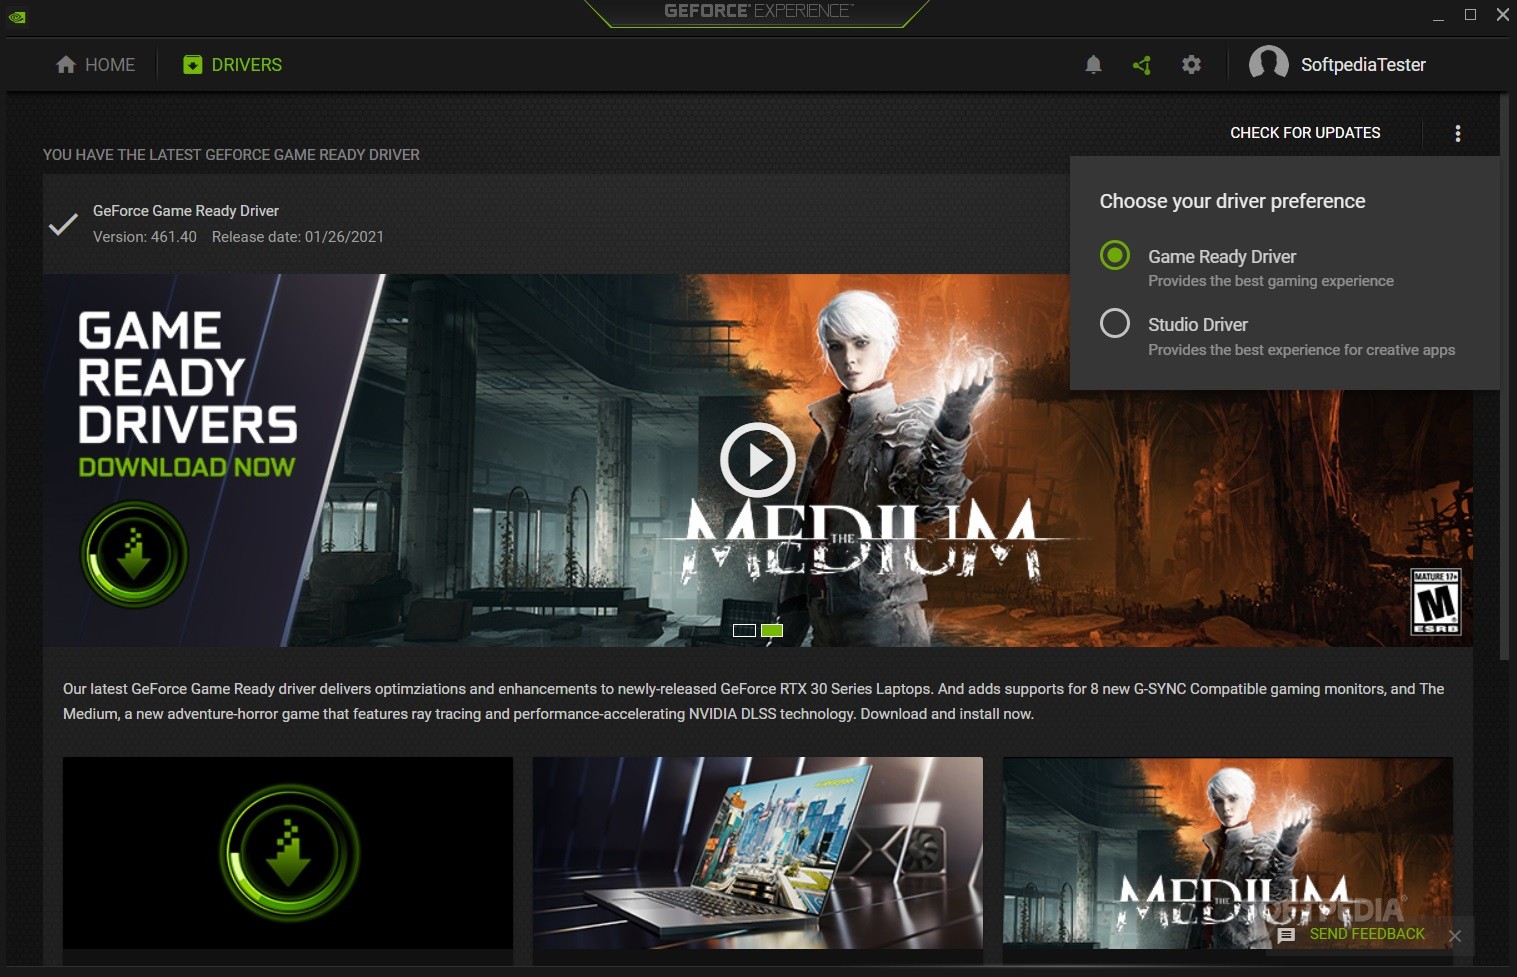 apps like nvidia geforce now